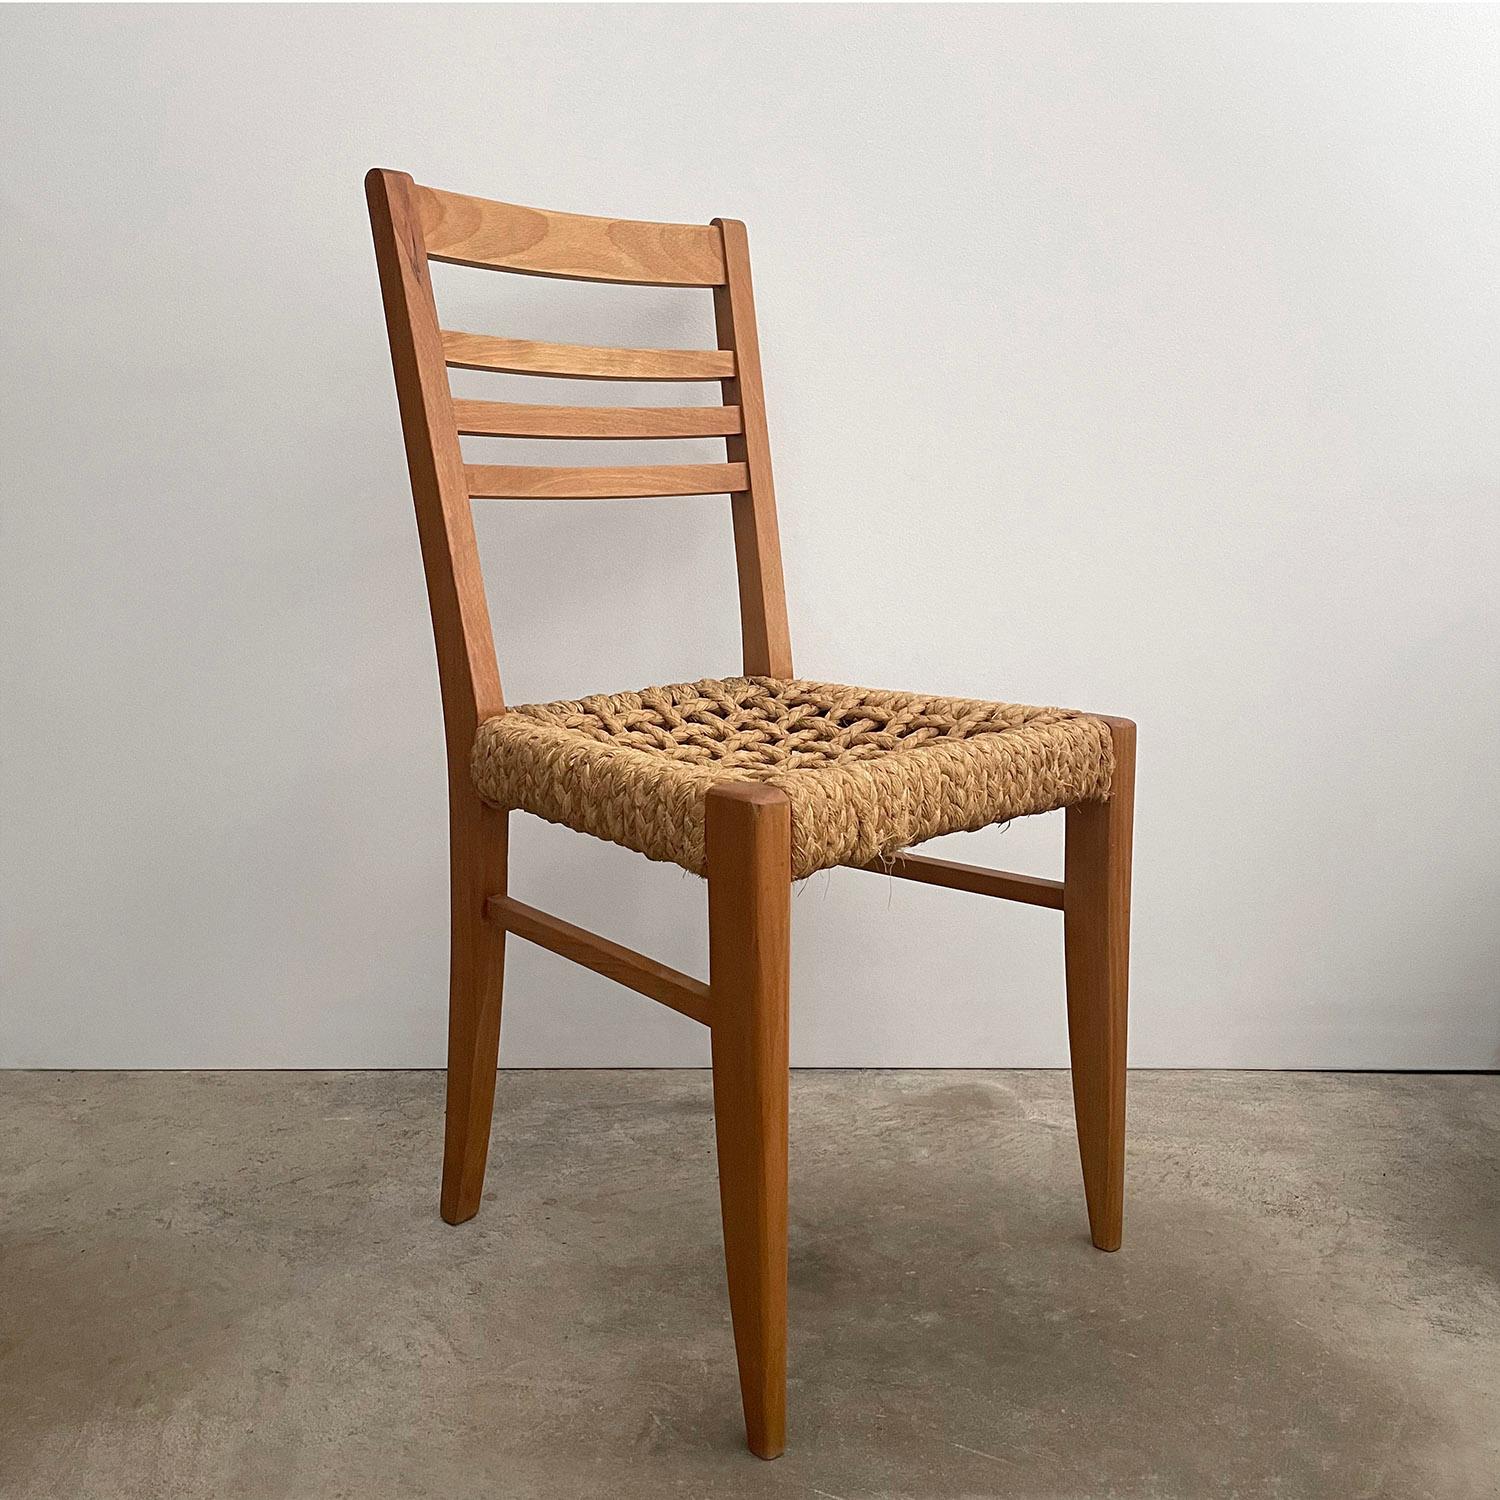 Audoux-Minet French Oak & Rope Side Chair
Designed by Adrien Audoux & Frida Minet
France, circa 1950s
This handsome side chair will add wonderful texture and rich history to any room 
Solid wood frame with braided rope seat
Seat shows minor wear